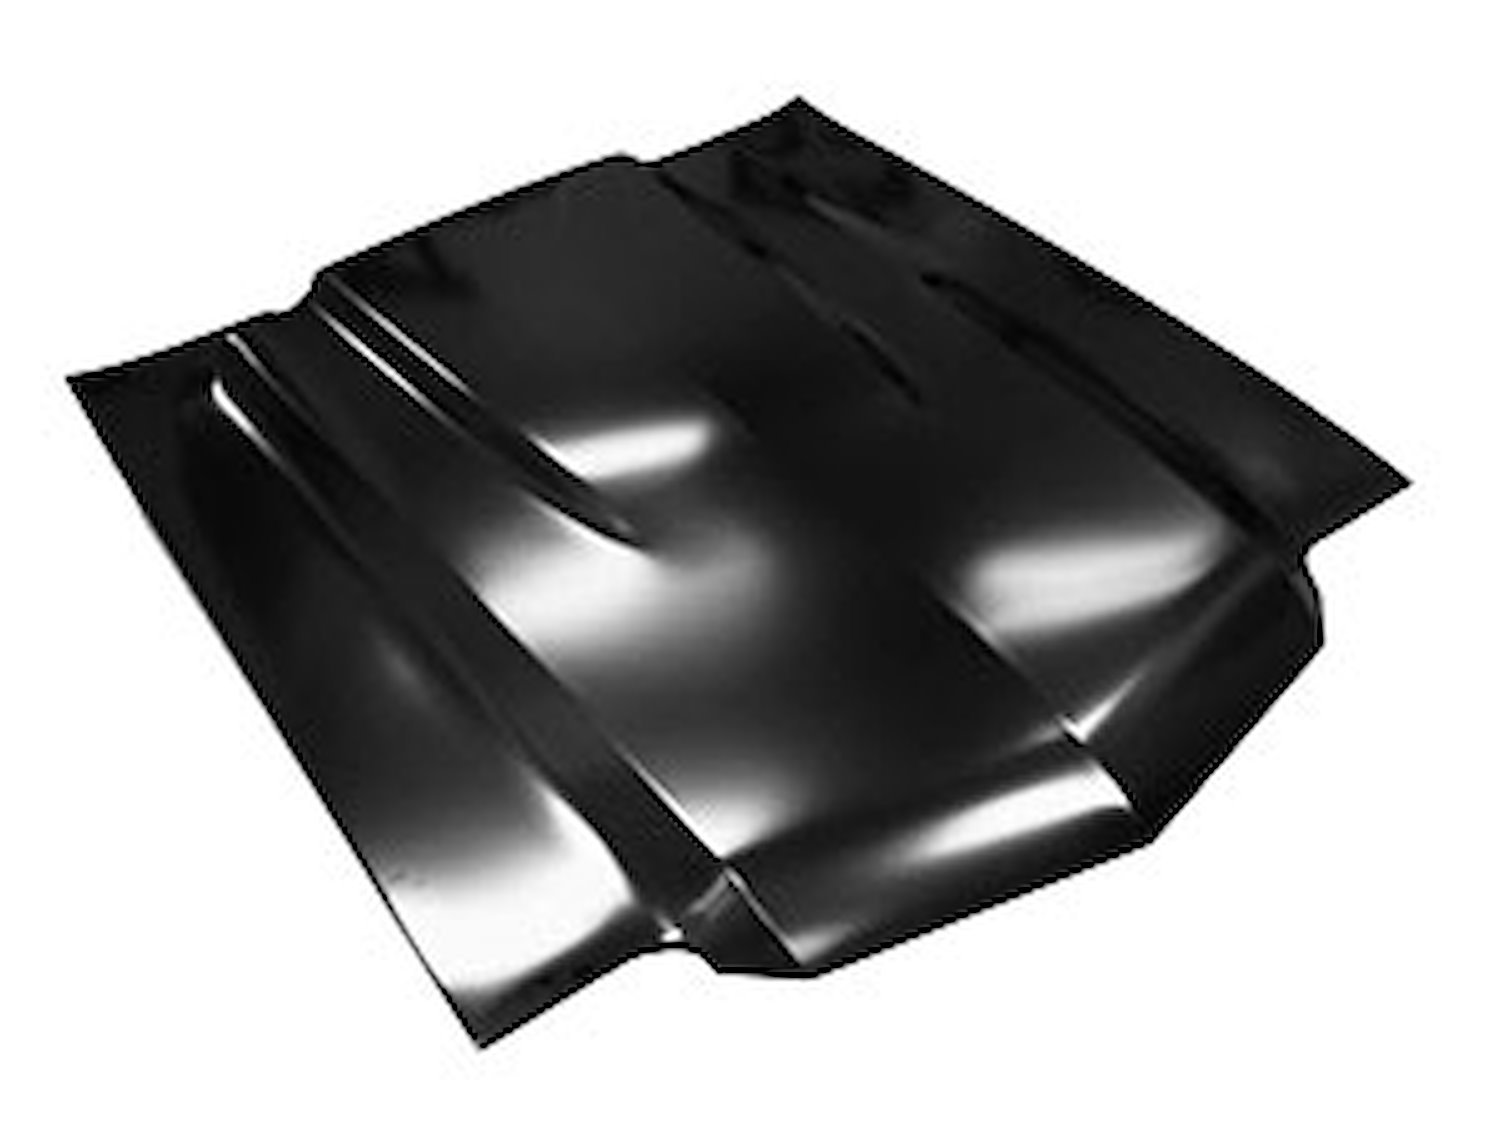 Steel Cowl Induction Hood for 1970-1972 Chevrolet Chevelle